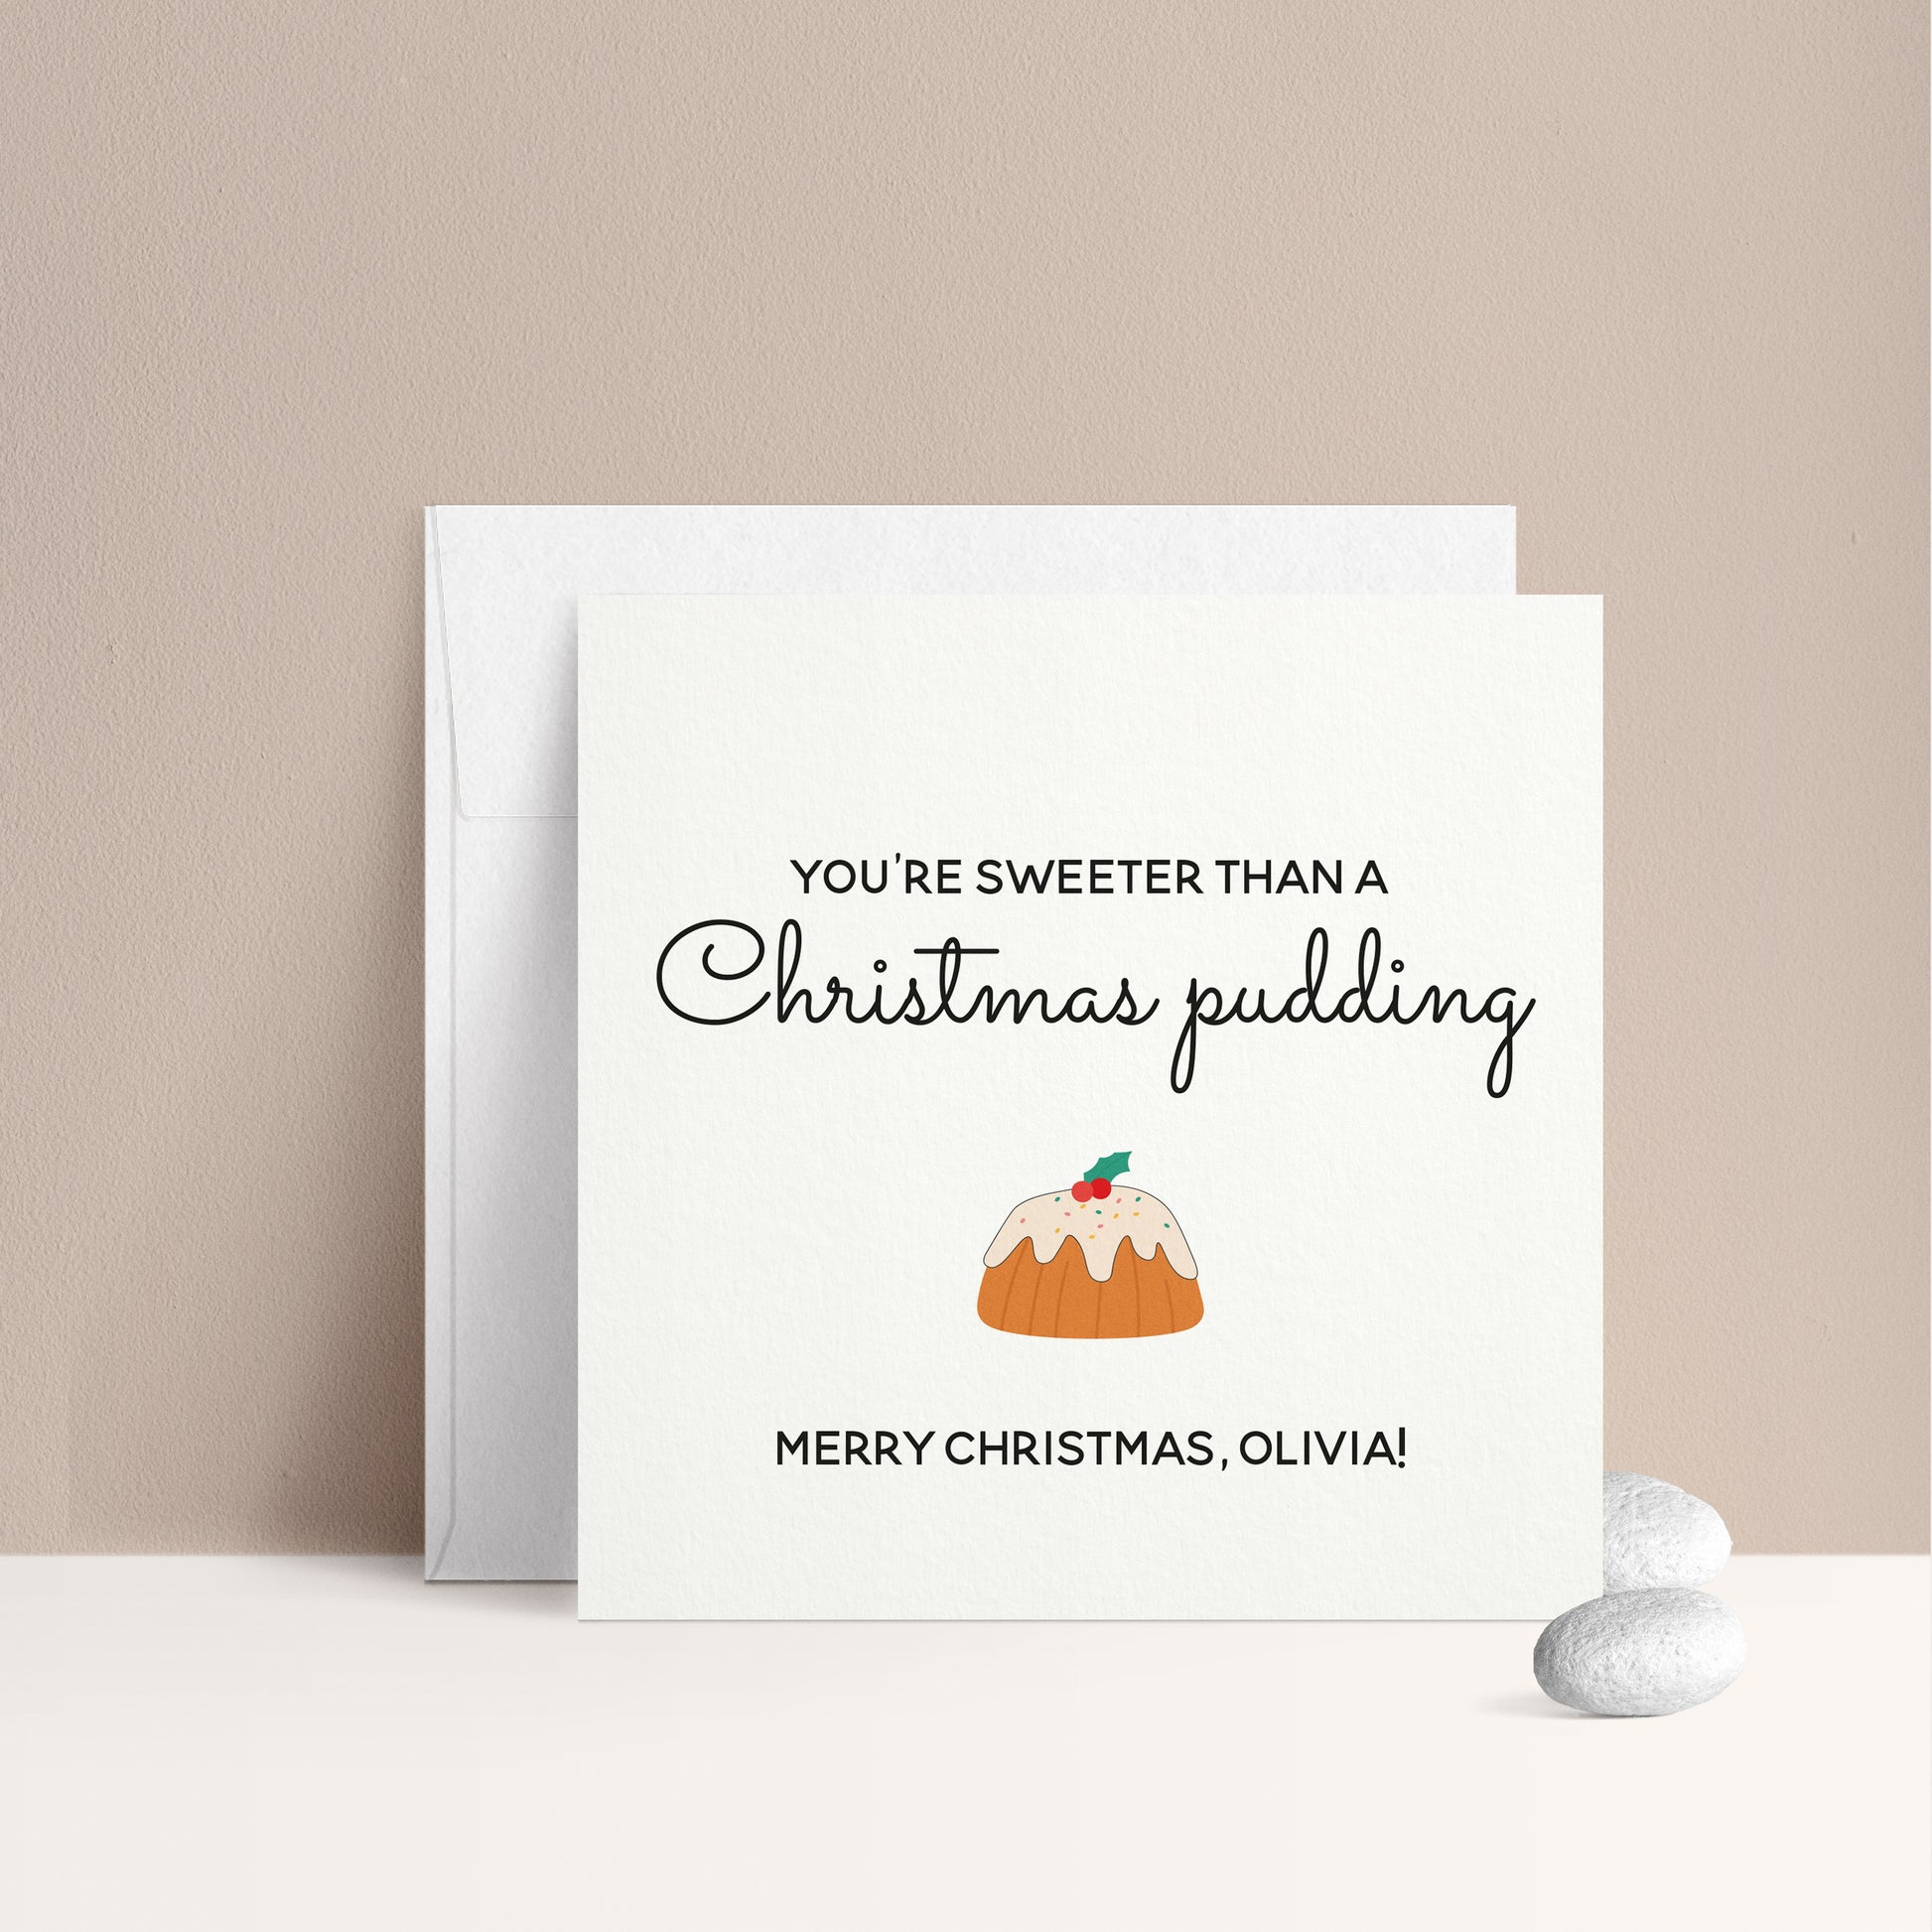 merry christmas card with you're sweeter than a christmas pudding design - XOXOKristen